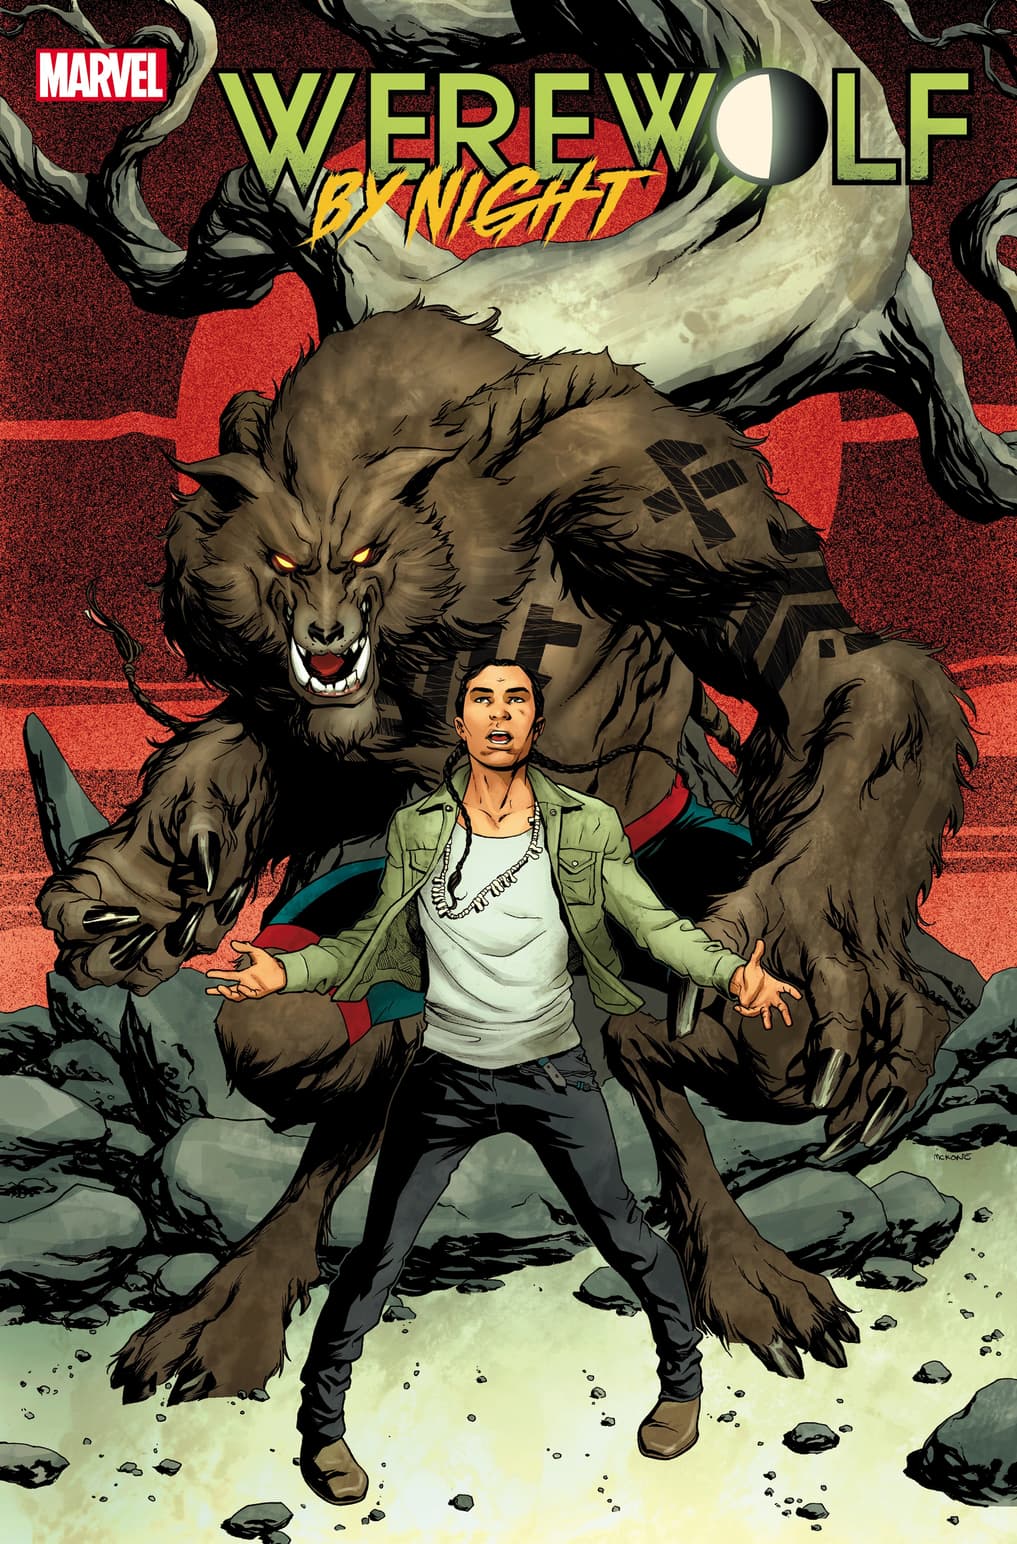 WEREWOLF BY NIGHT #1 cover by Mike McKone